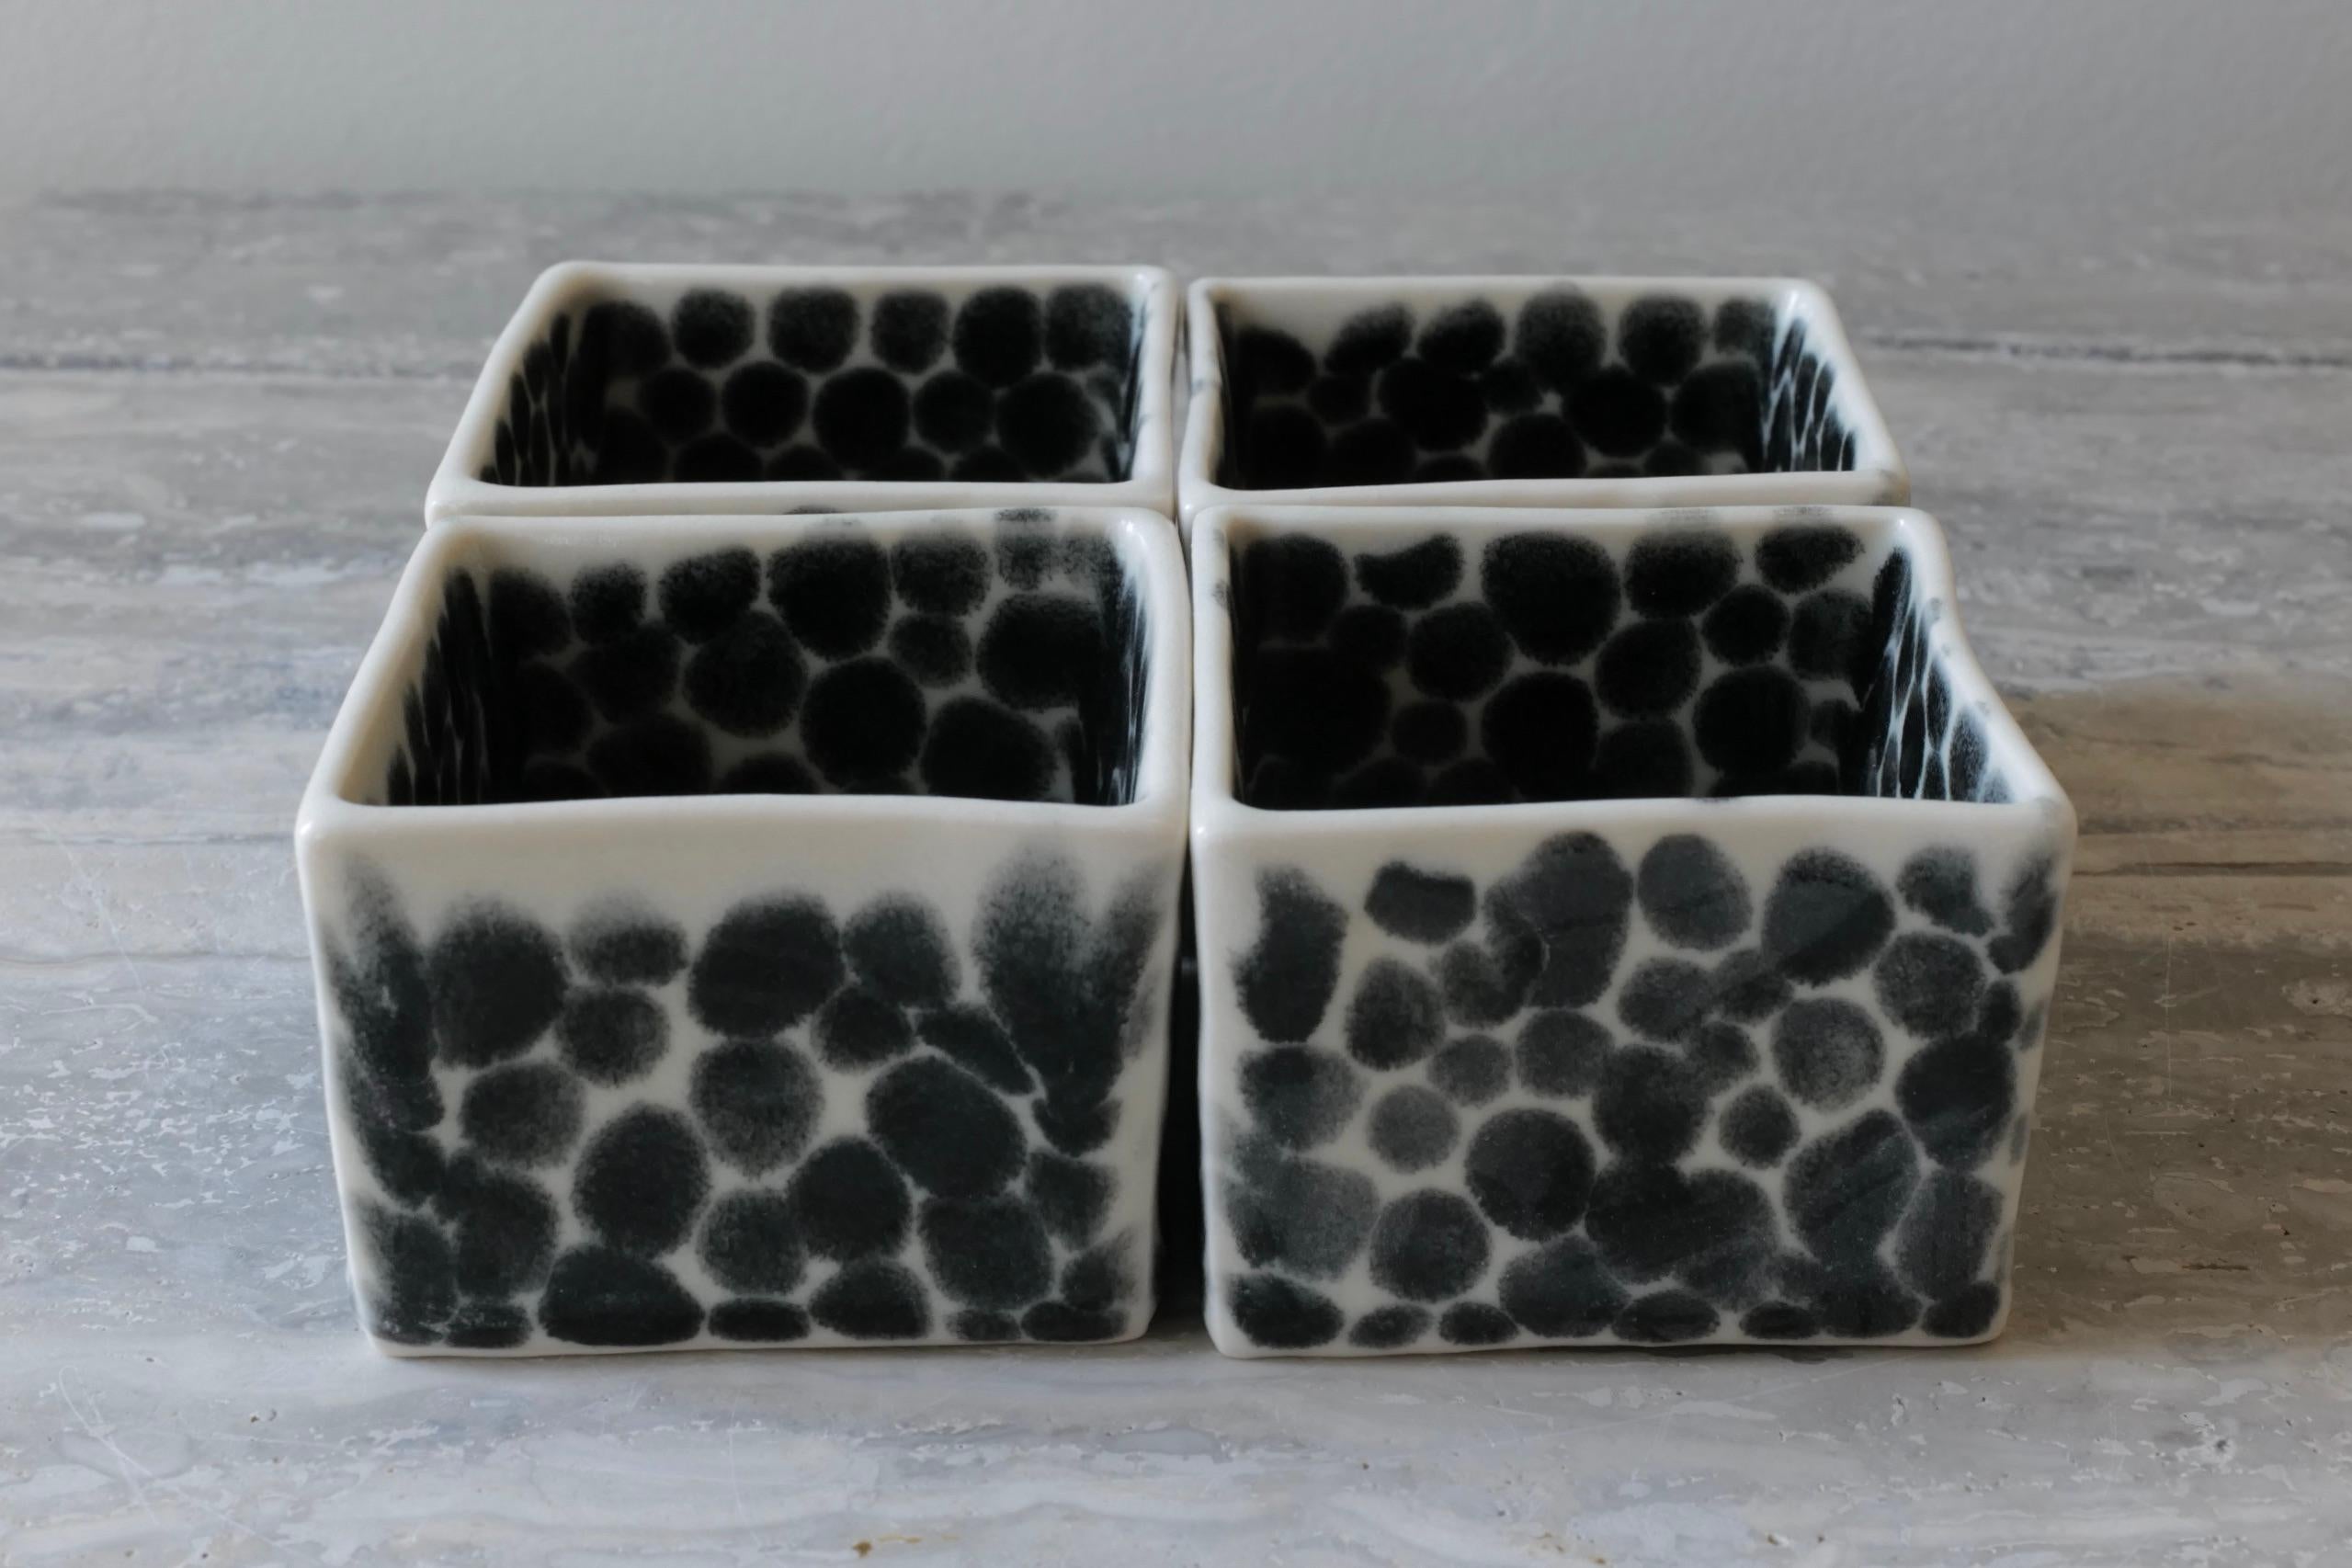 Set of 4 elegant open small cubes, which function together as a sculpture or could be filled with candles or trinkets. Hand-cast in porcelain and once bisque fired, each dot is hand-painted with shiny black glaze. An unconventional layered glazing